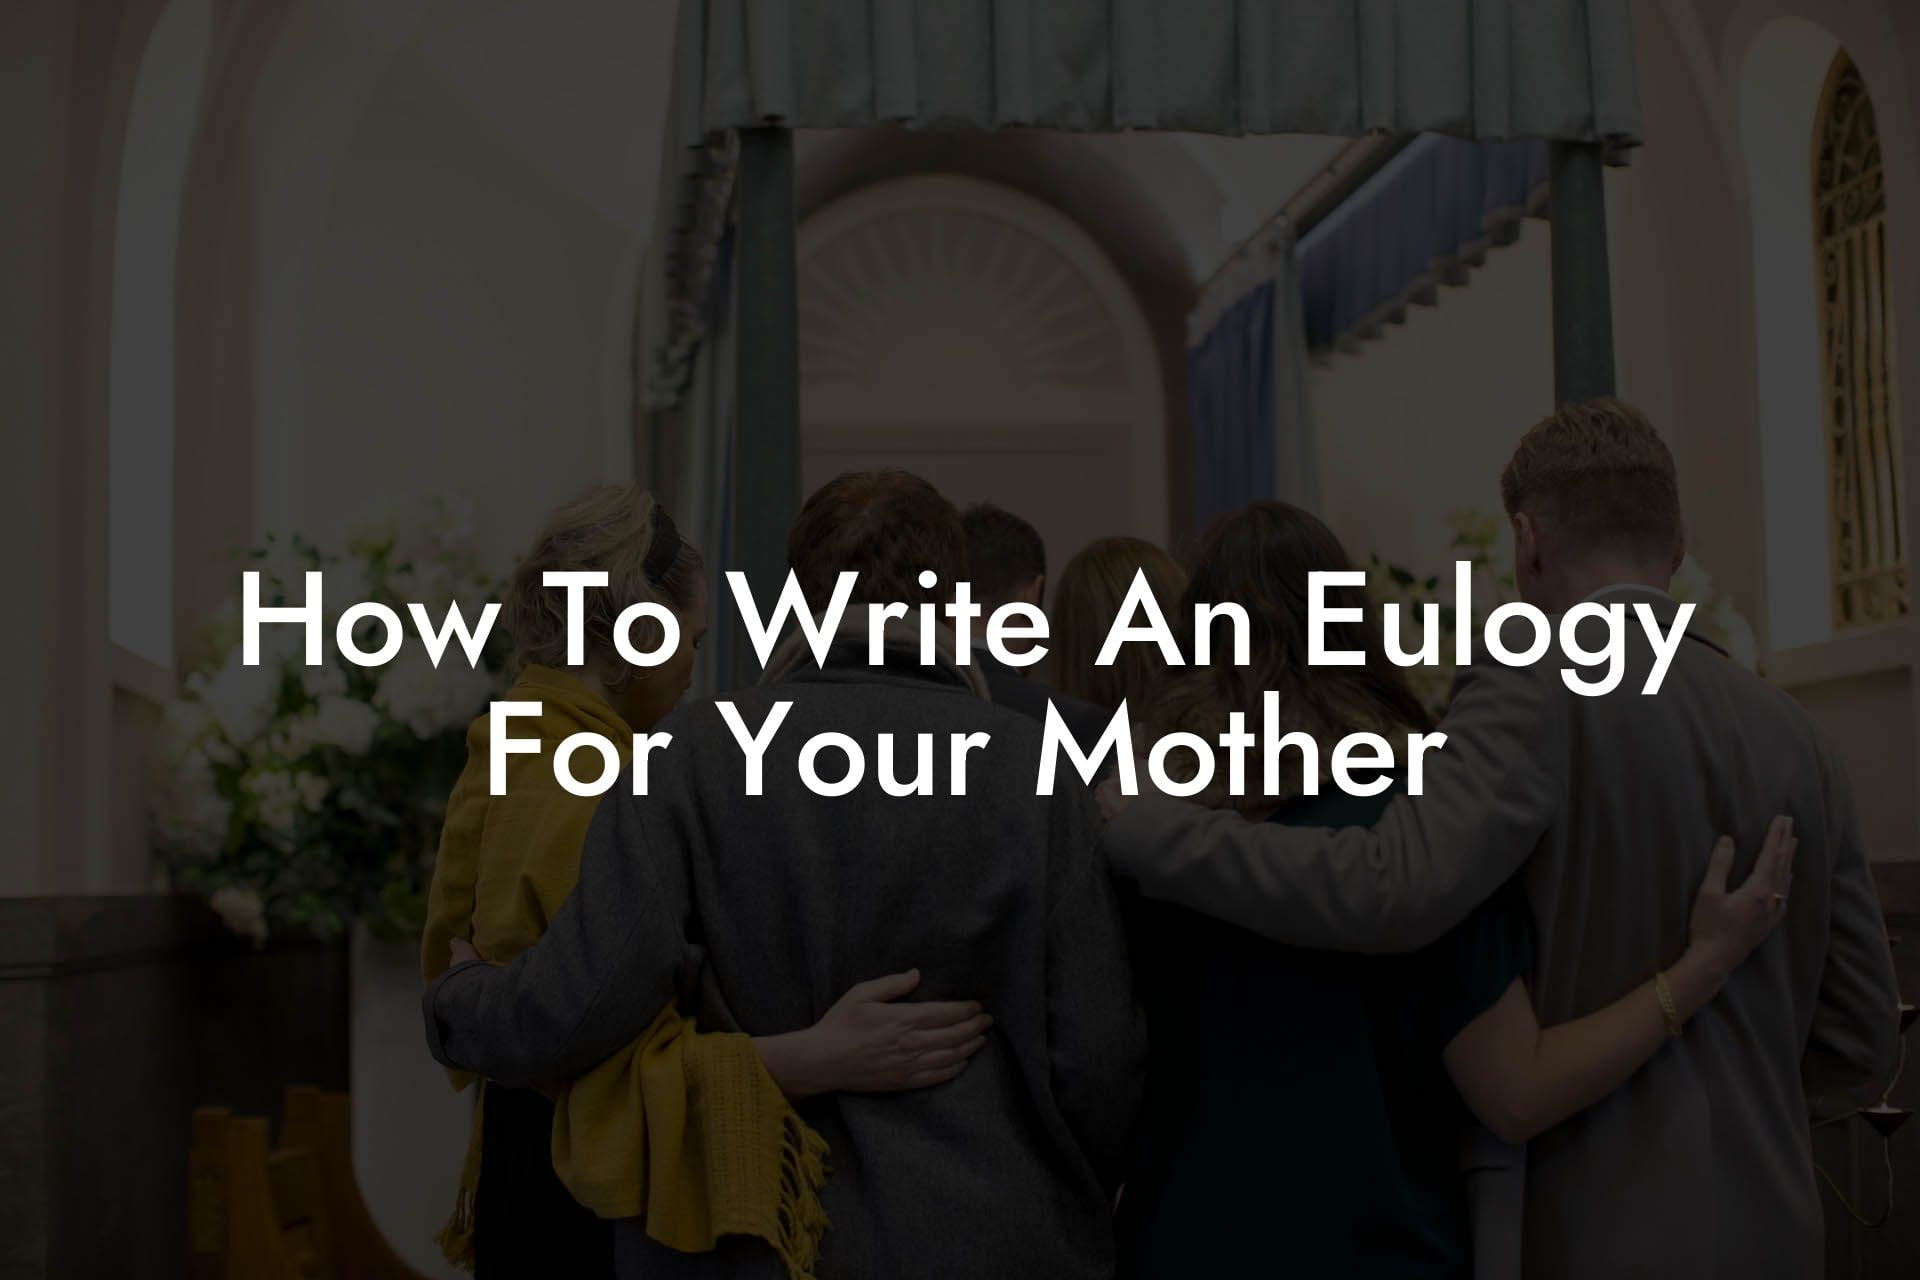 How To Write An Eulogy For Your Mother